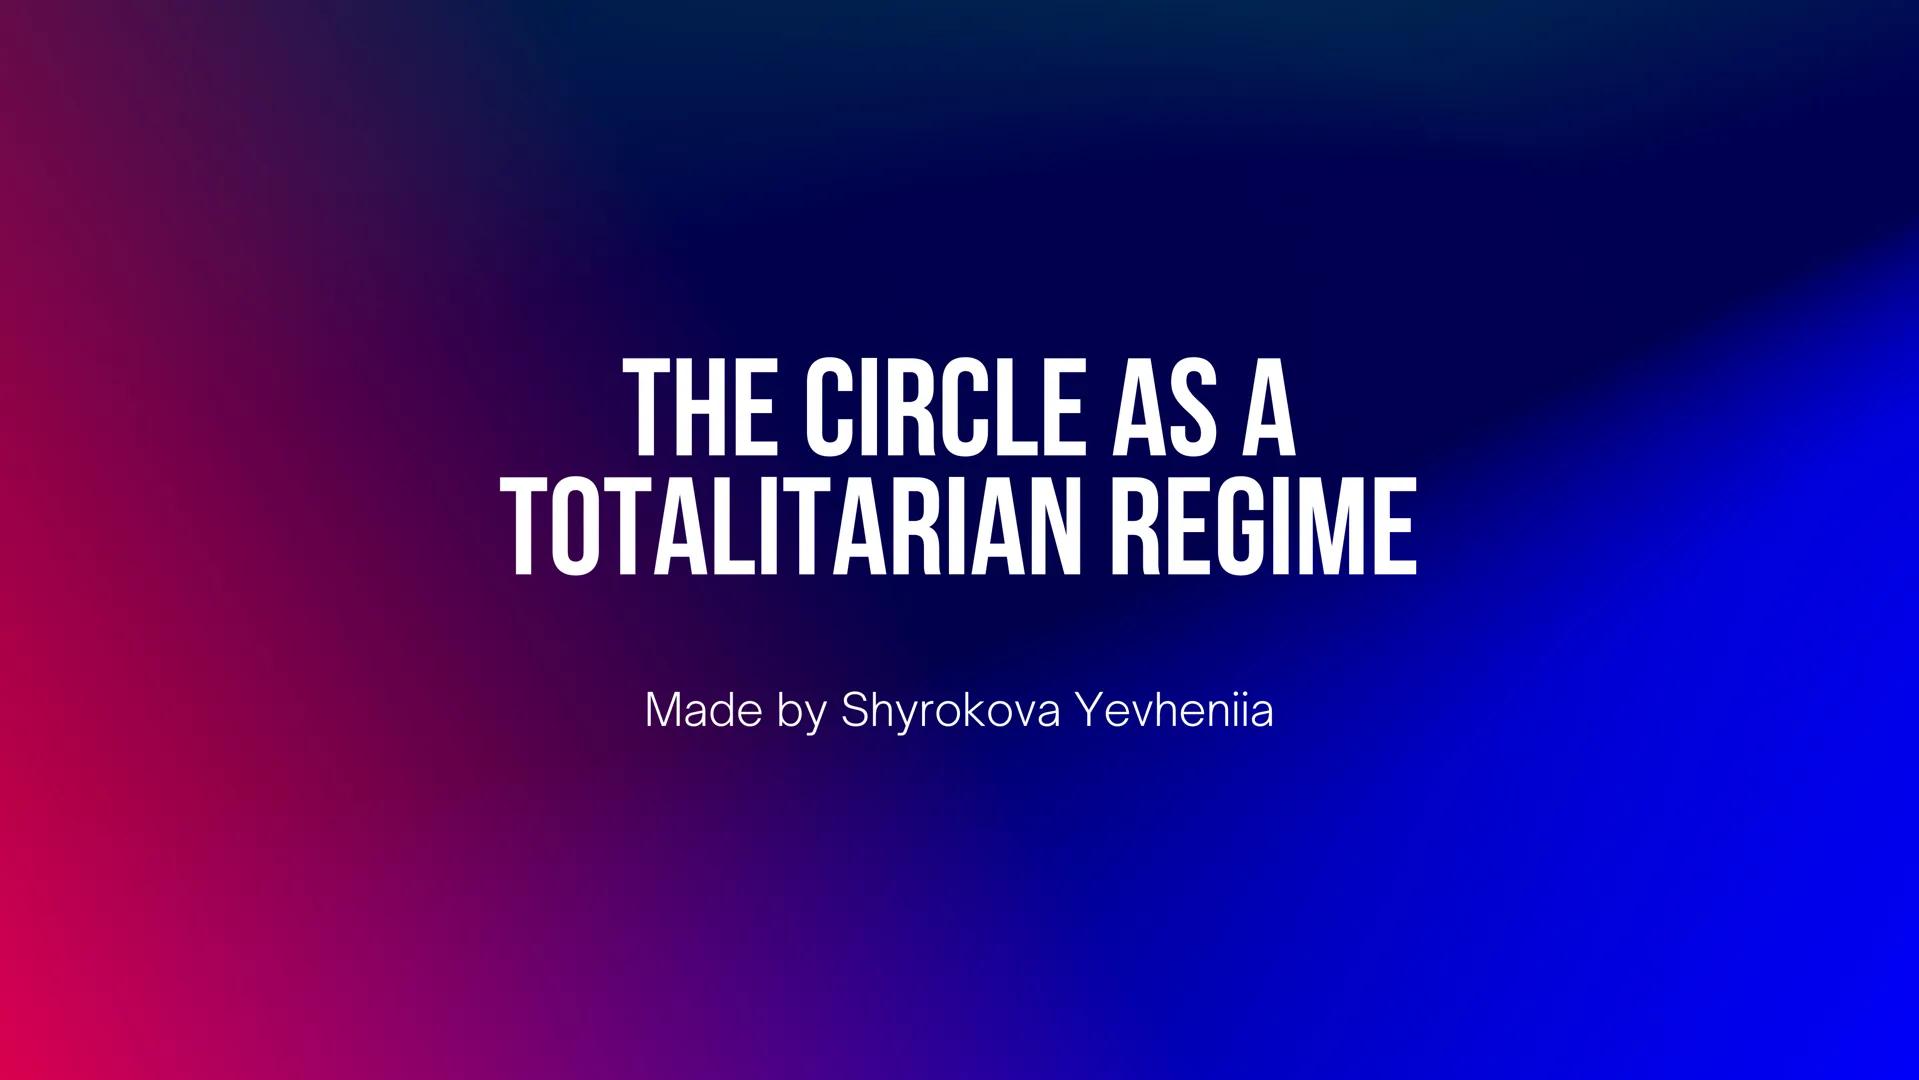 THE CIRCLE AS A
TOTALITARIAN REGIME
Made by Shyrokova Yevheniia TOTALITARIANISM DEFINED
• A political system where the state has absolute po